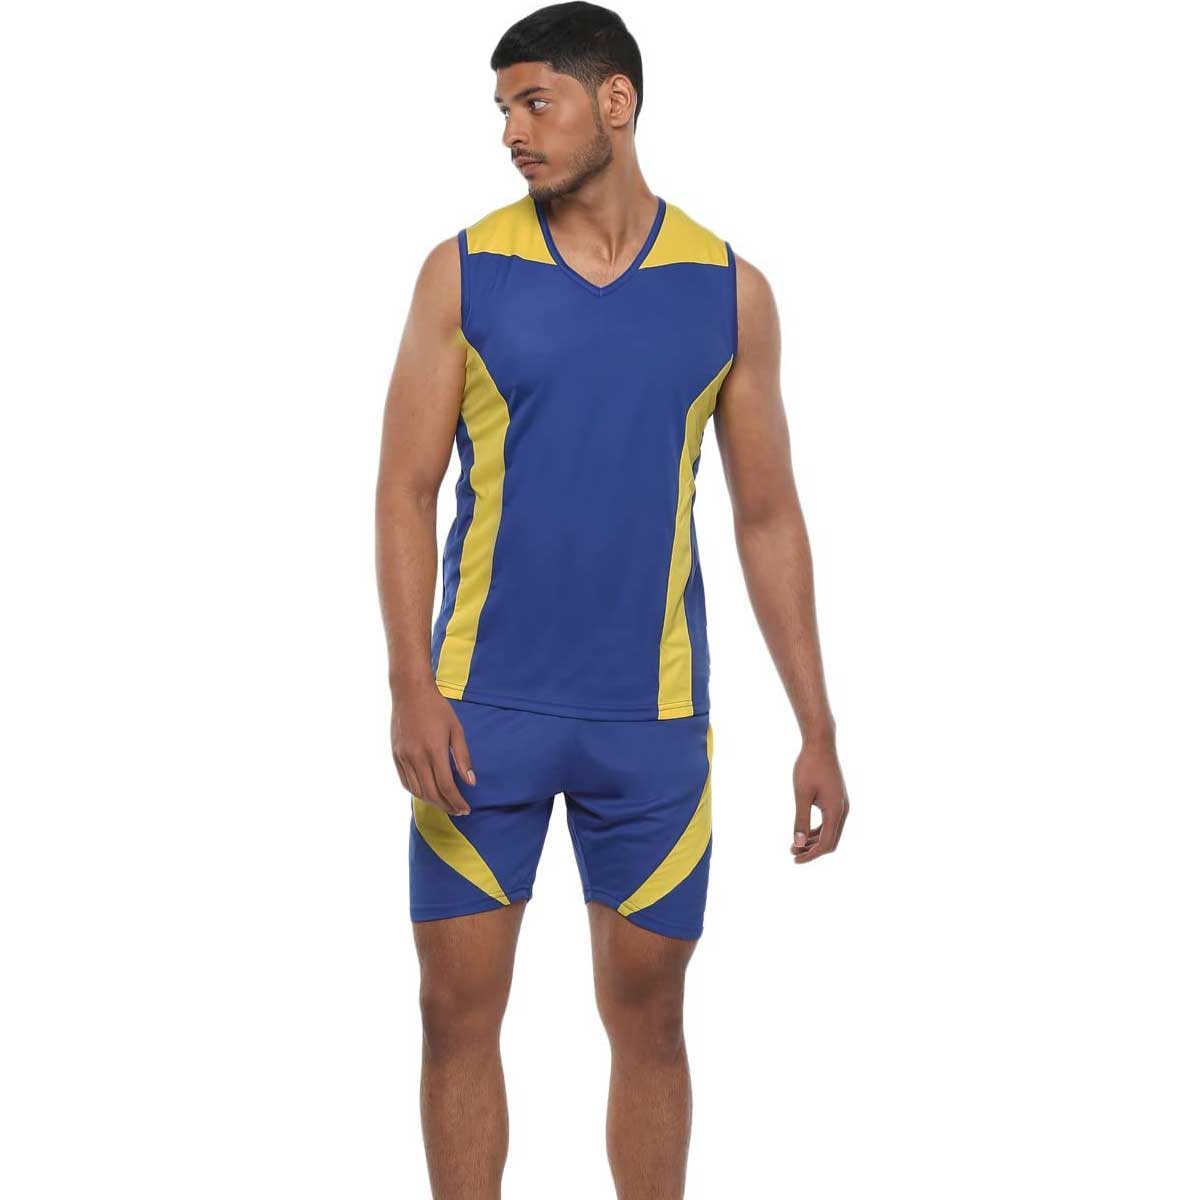 Cut and Sew Volleyball Jersey Manufacturers in Croatia